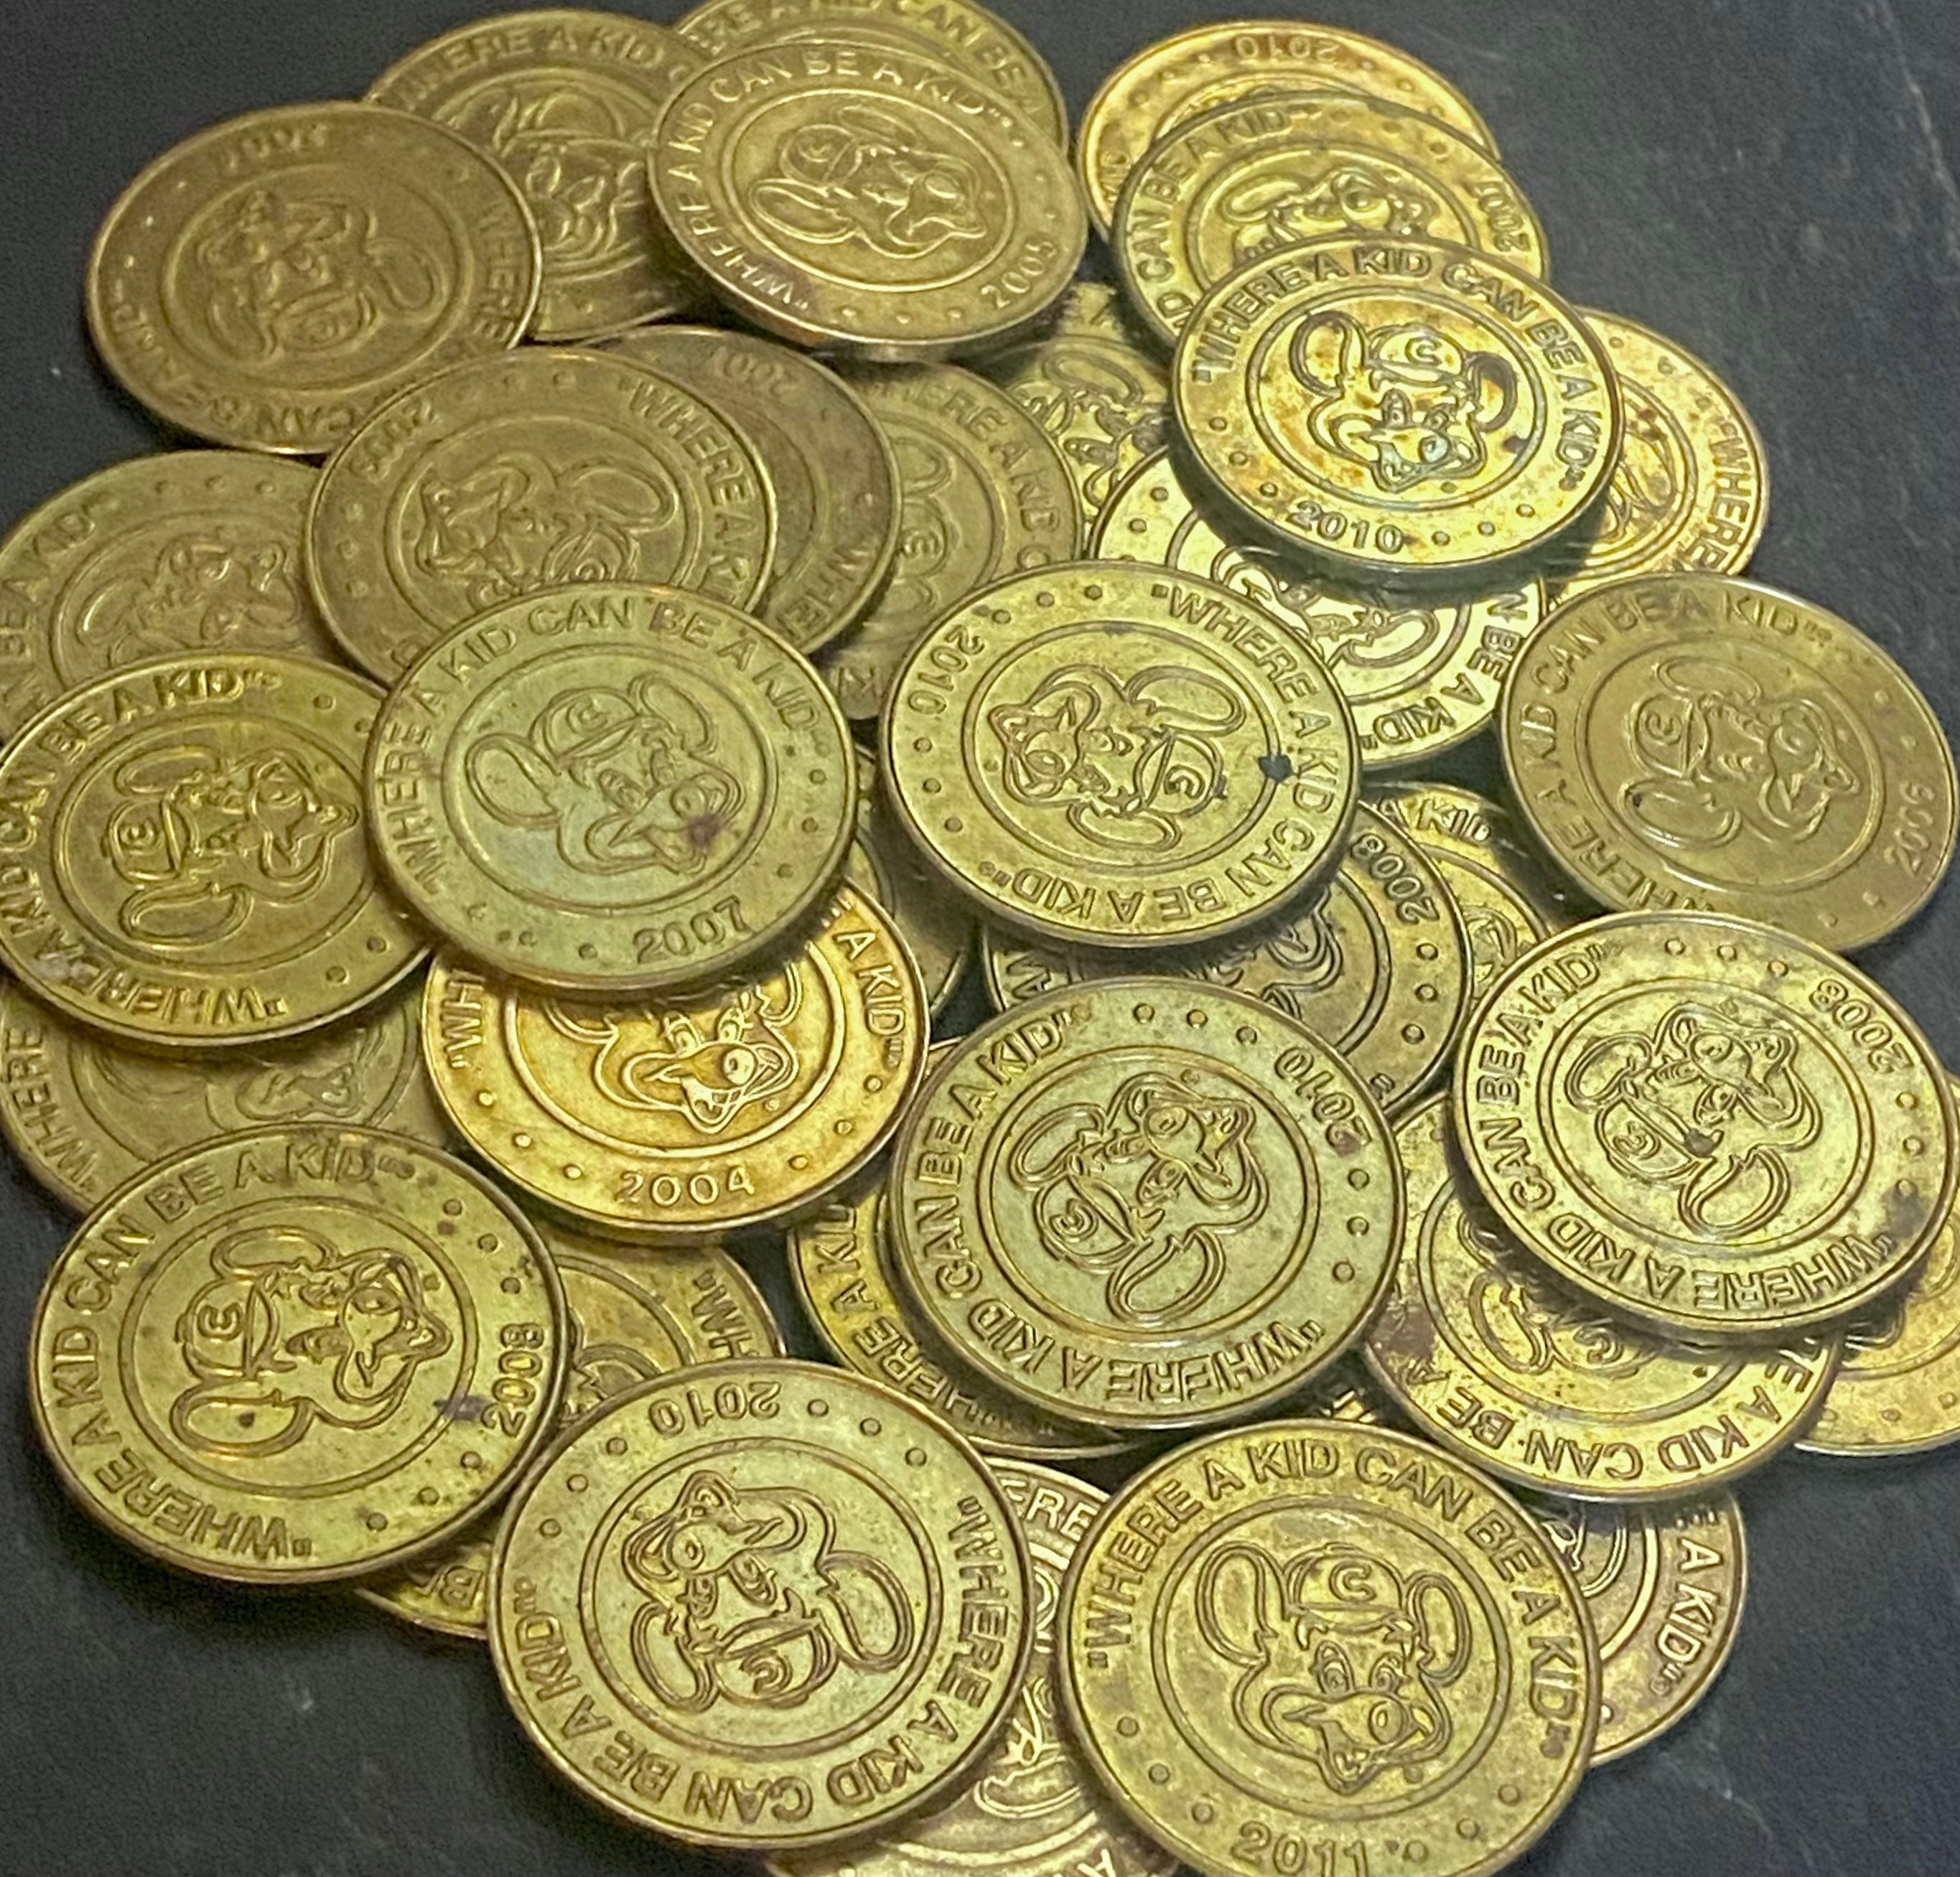 VC&G | » [ Retro Scan ] Chuck E. Cheese Tokens and Tickets